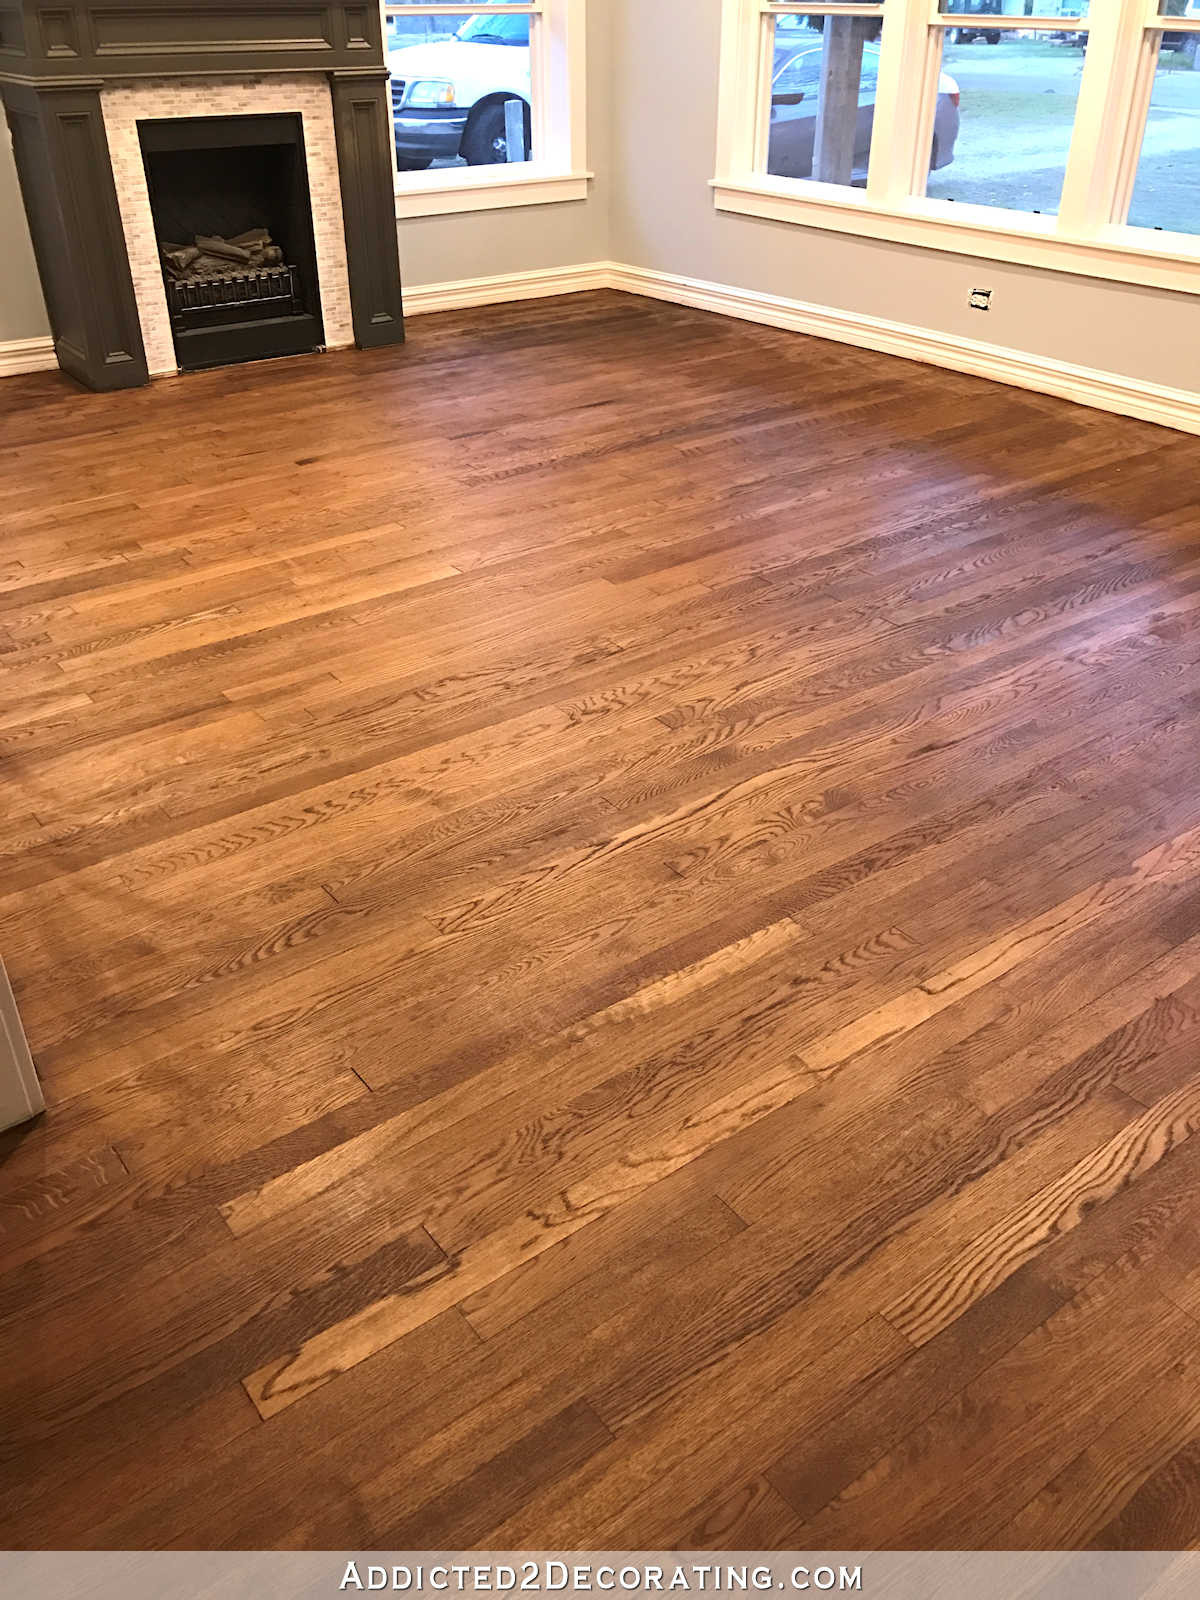 25 Nice How Much Does Restaining Hardwood Floors Cost 2022 free download how much does restaining hardwood floors cost of adventures in staining my red oak hardwood floors products process throughout staining red oak hardwood floors 8a living room and entryway